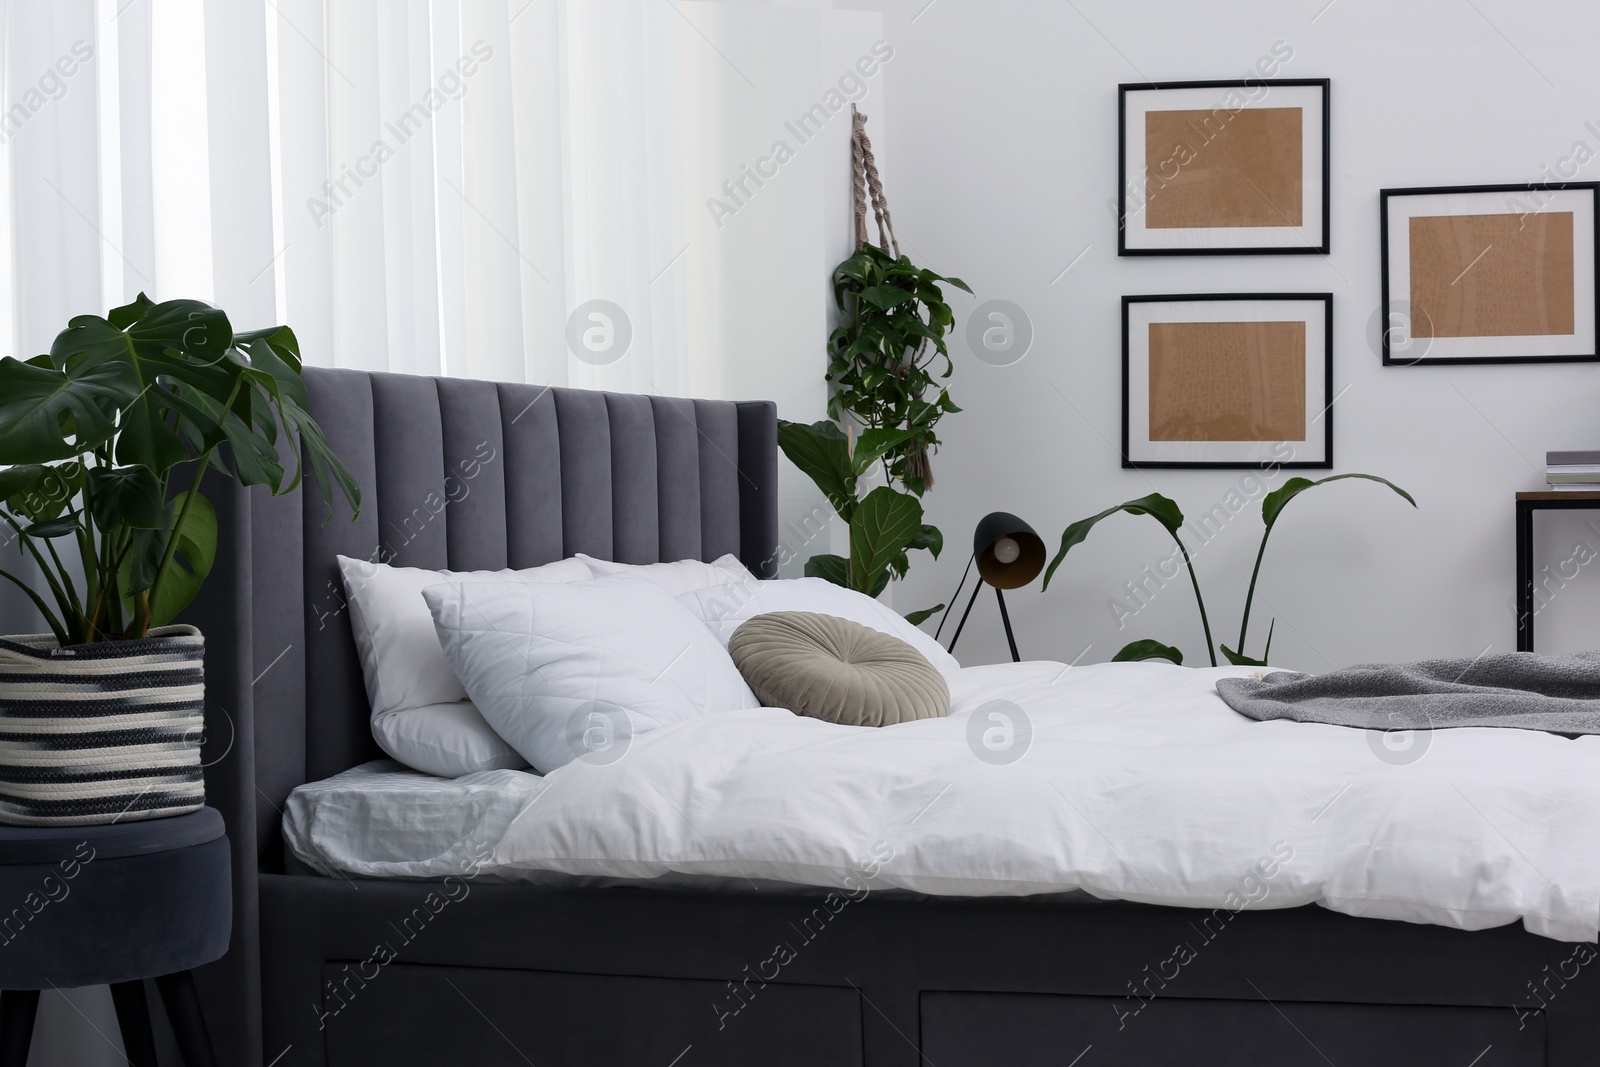 Photo of Large comfortable bed and beautiful houseplants in room. Bedroom interior